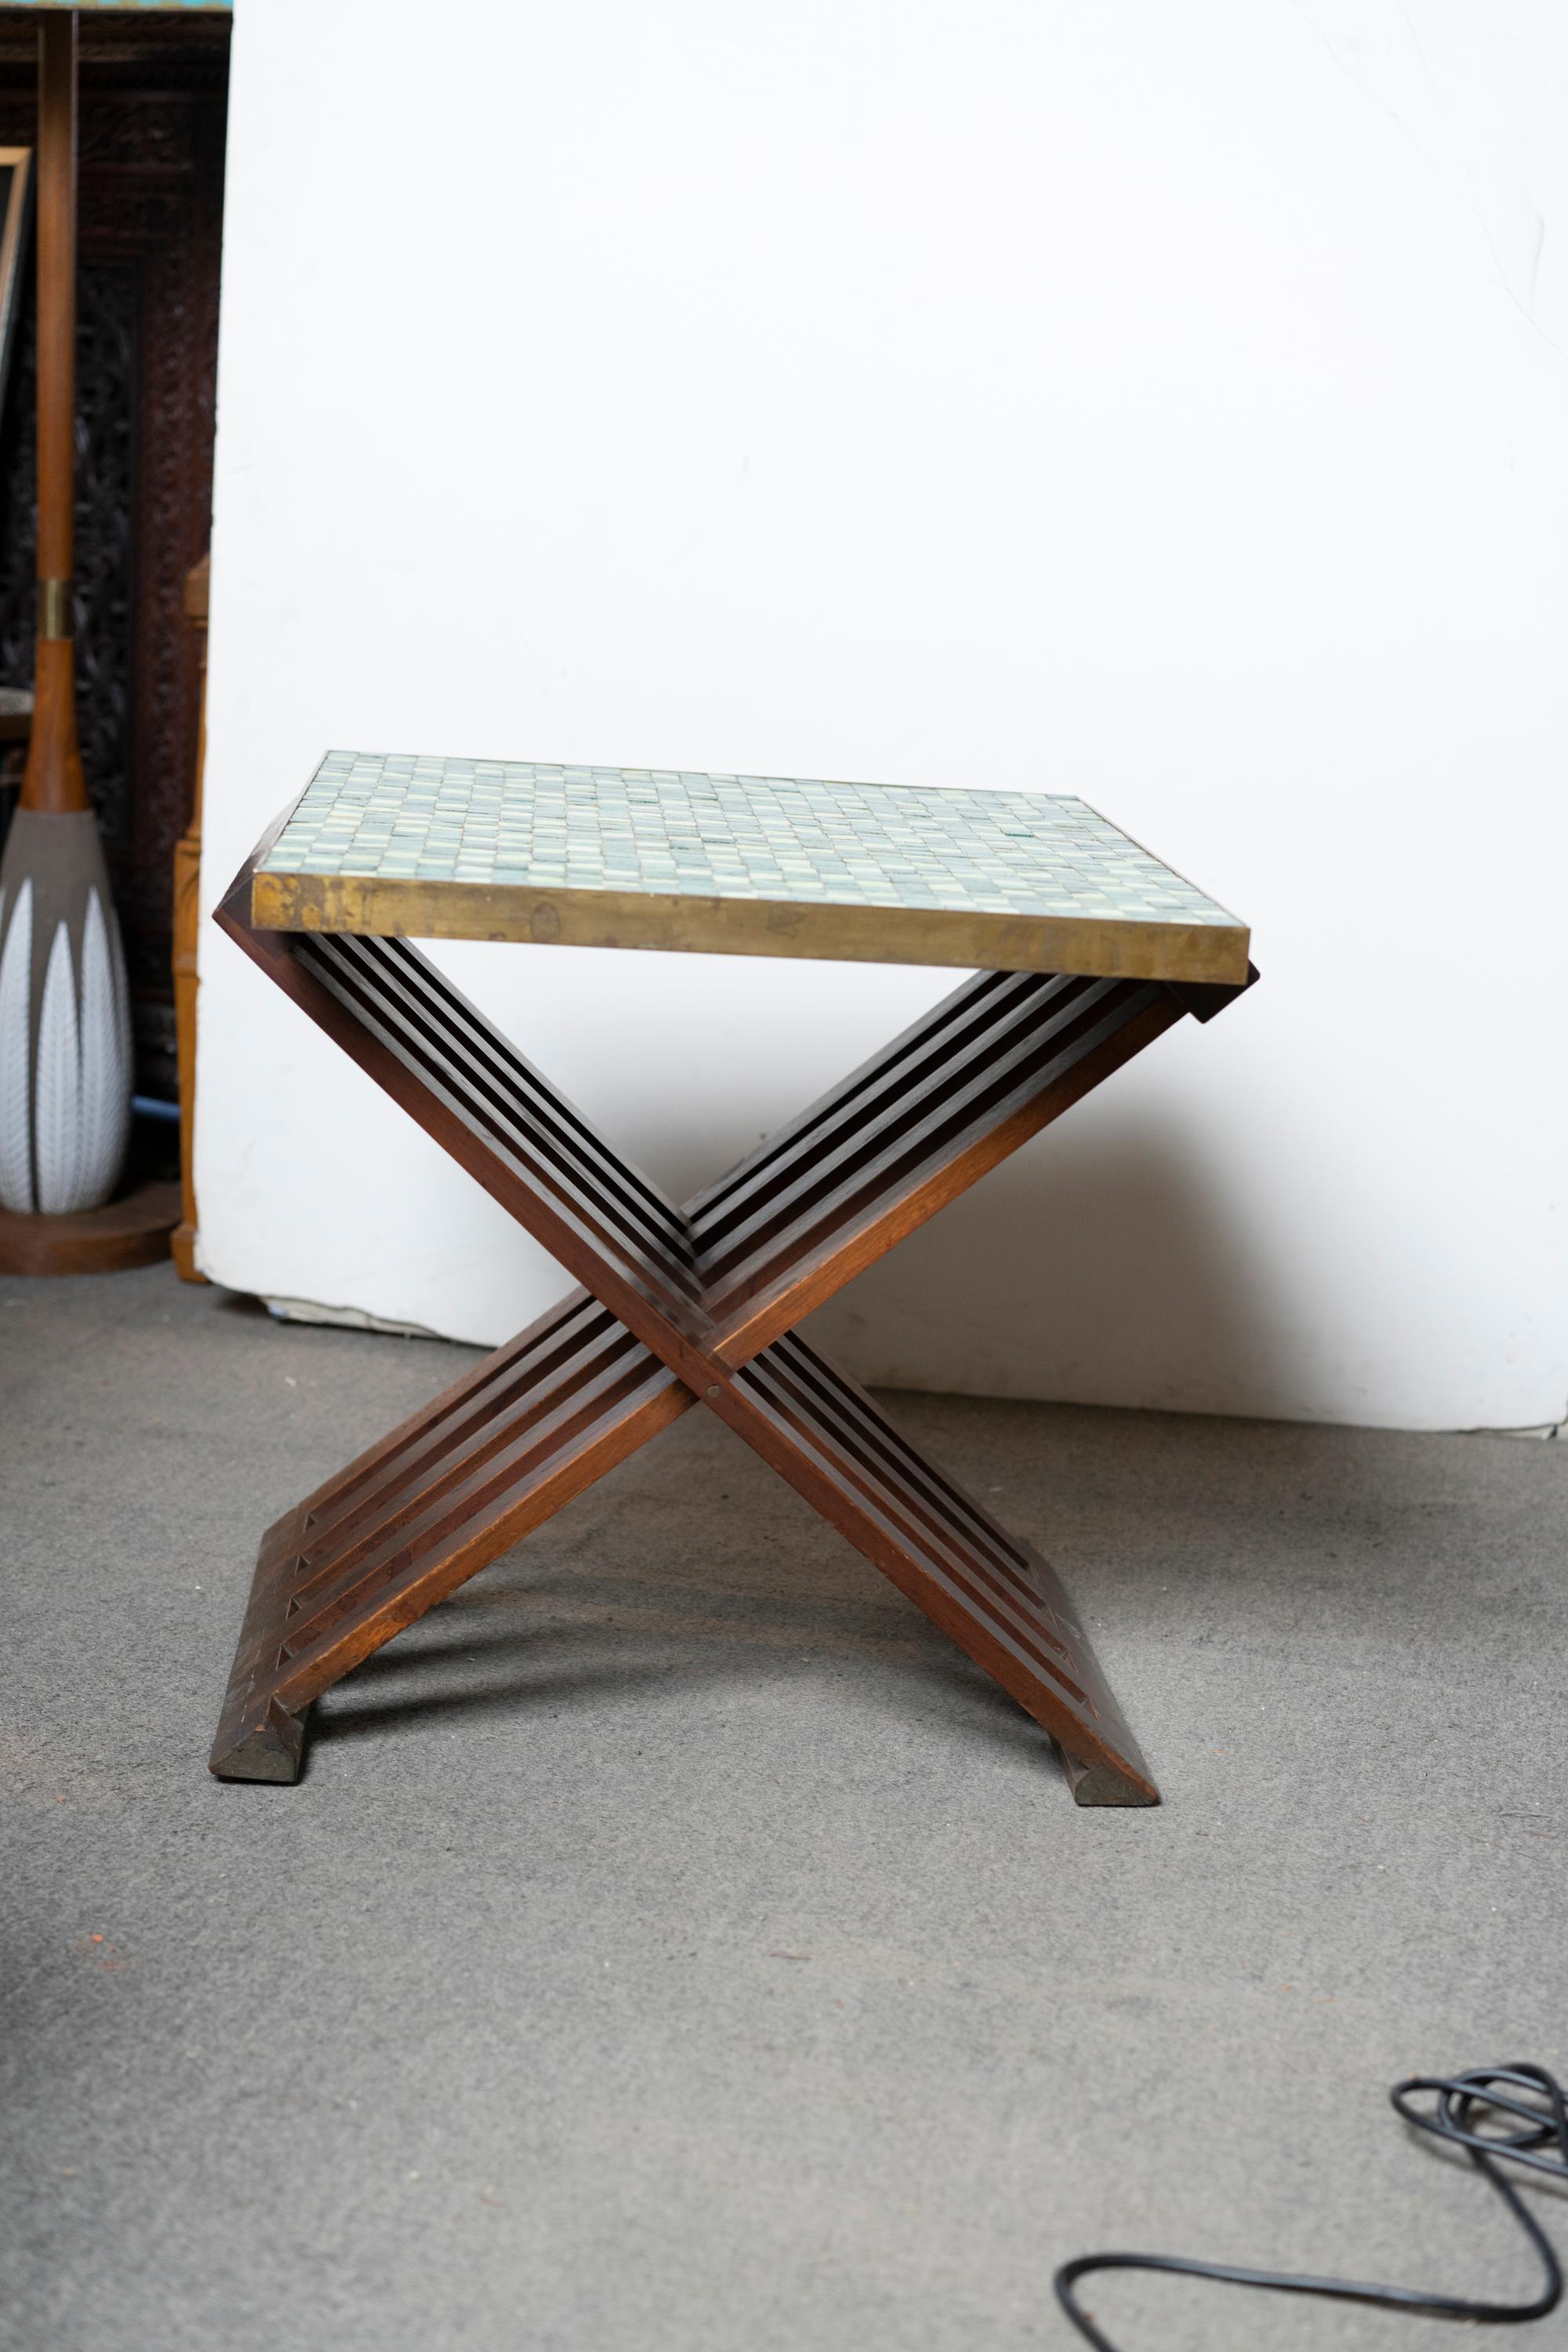 Mid-Century Modern Edward Wormley for Dunbar Occasional Table with Murano Mosaic Tiles For Sale